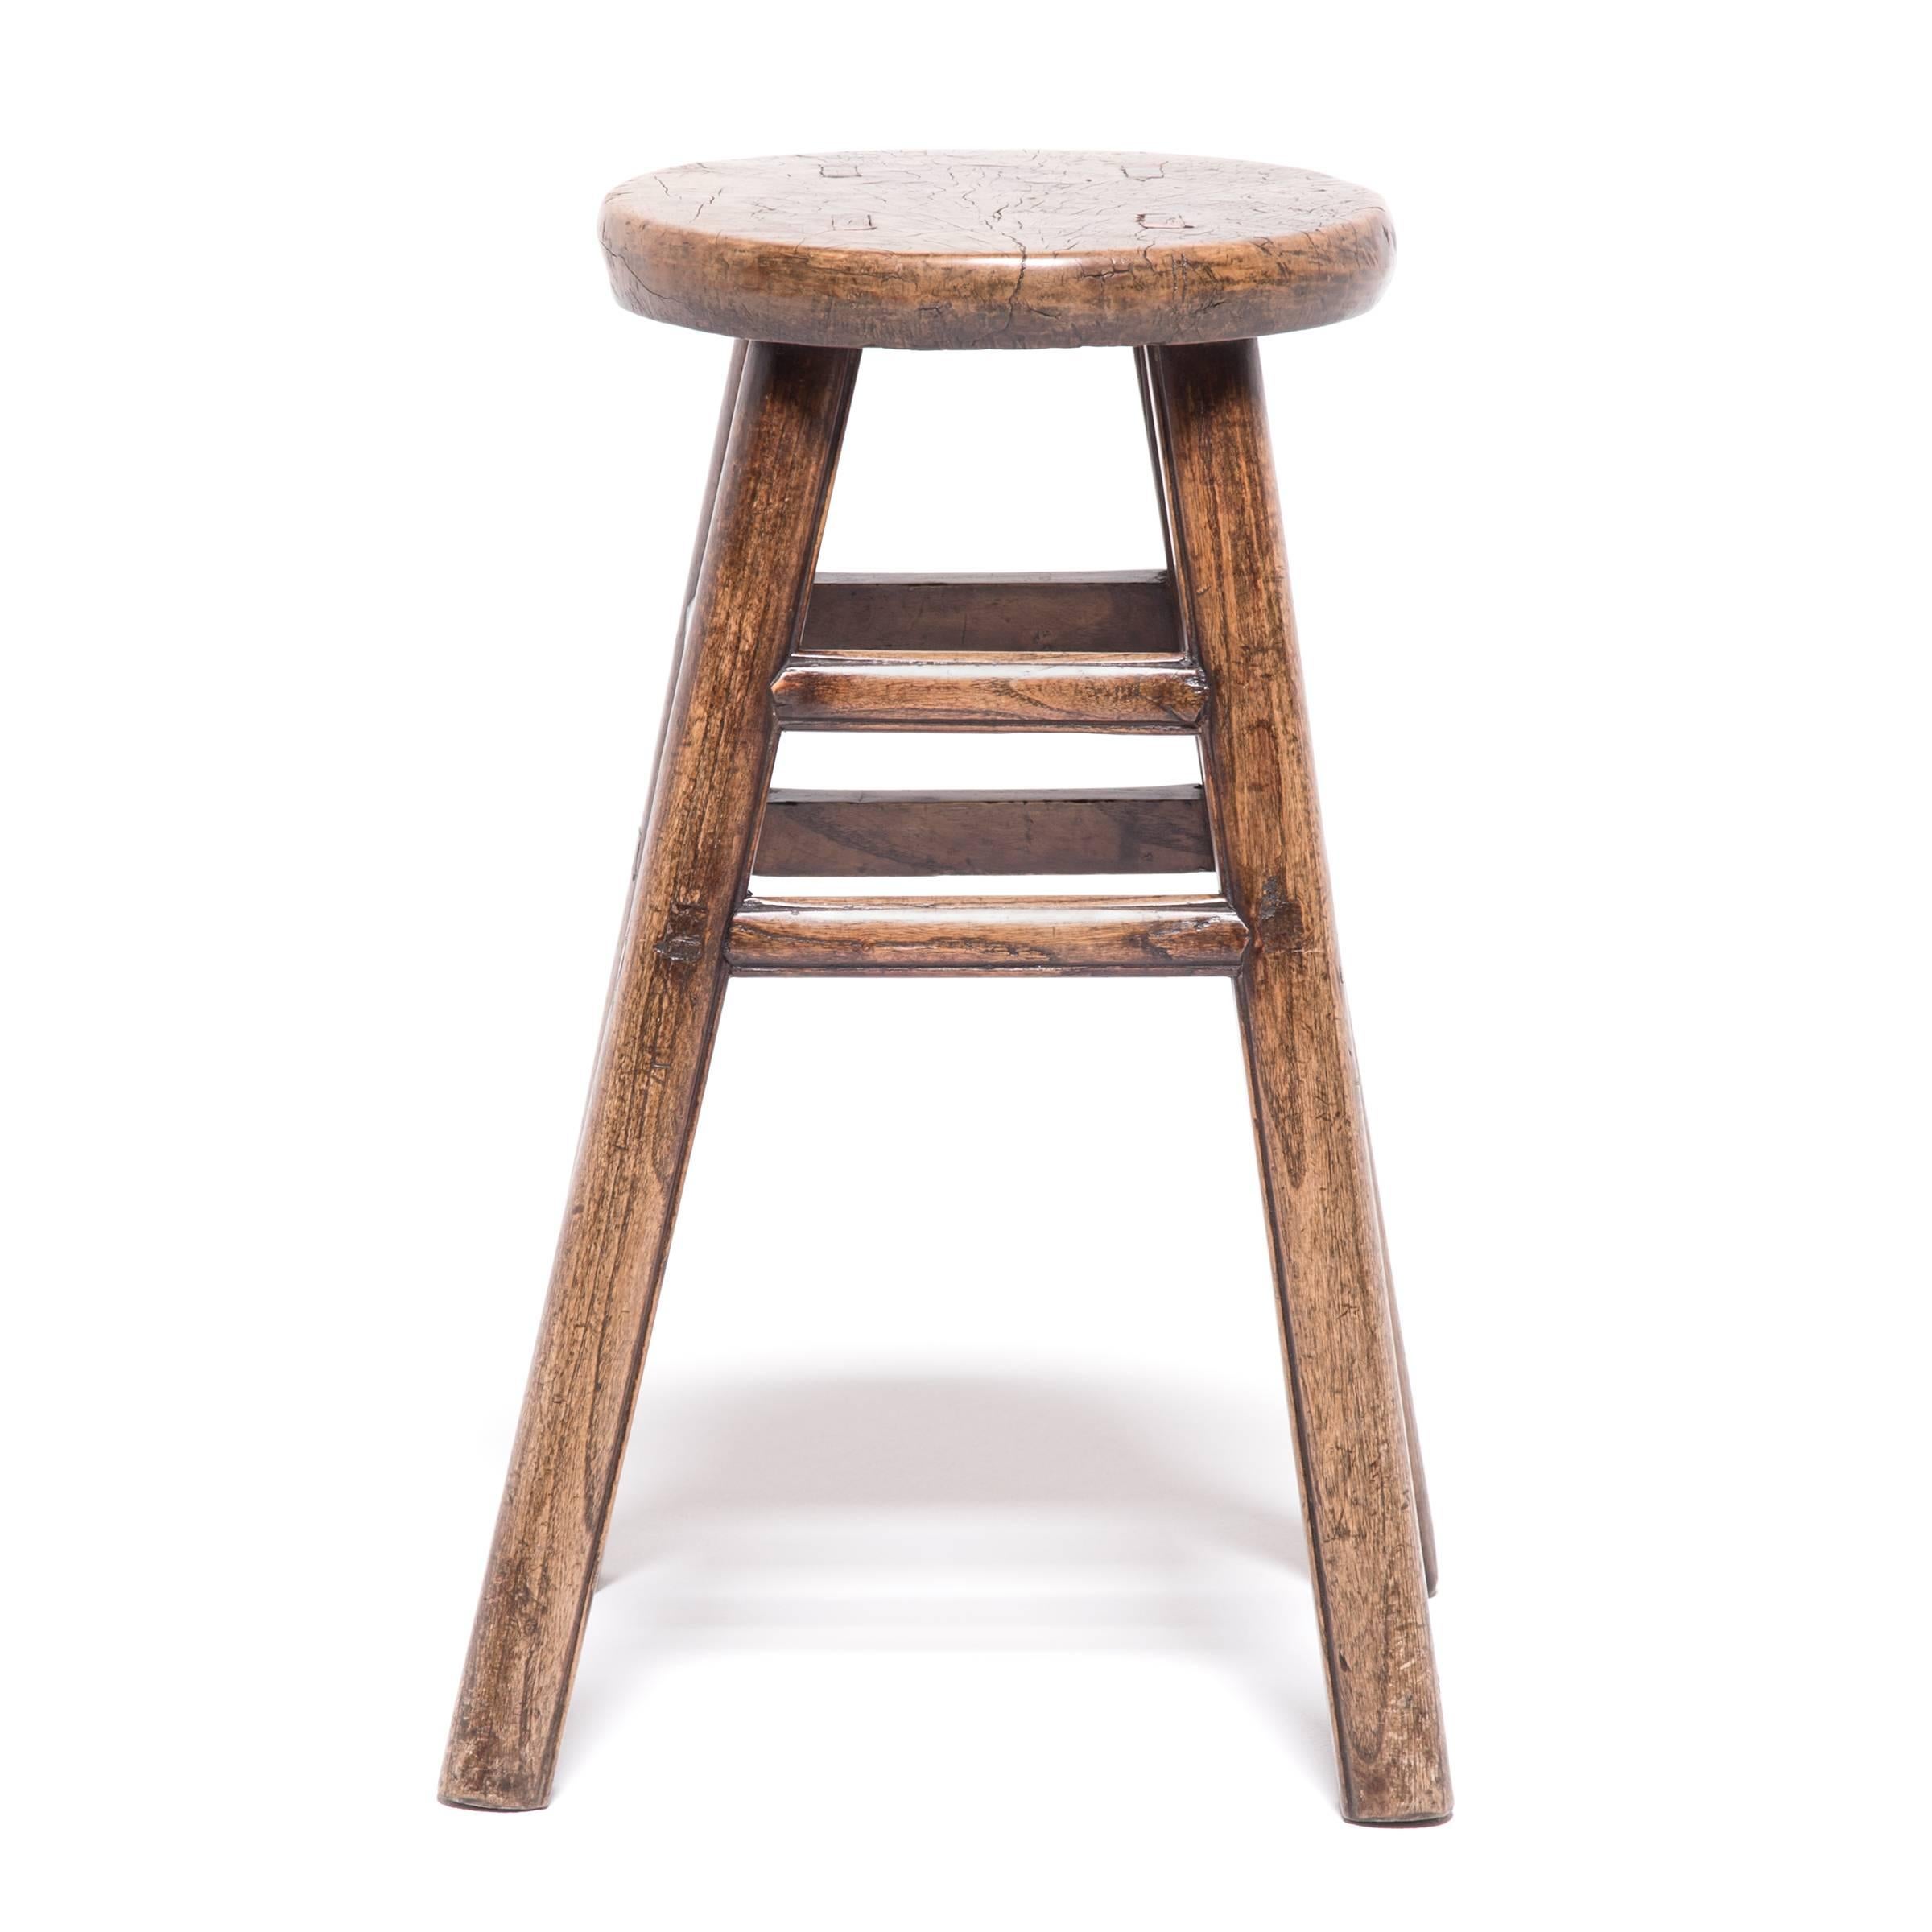 Like the full moon displaying its craters and ridges, the round seat of this otherwise straightforward stool displays the swirling grain and unusual markings of burled wood. Cultivated from irregular growths on trees, this type of wood is prized for